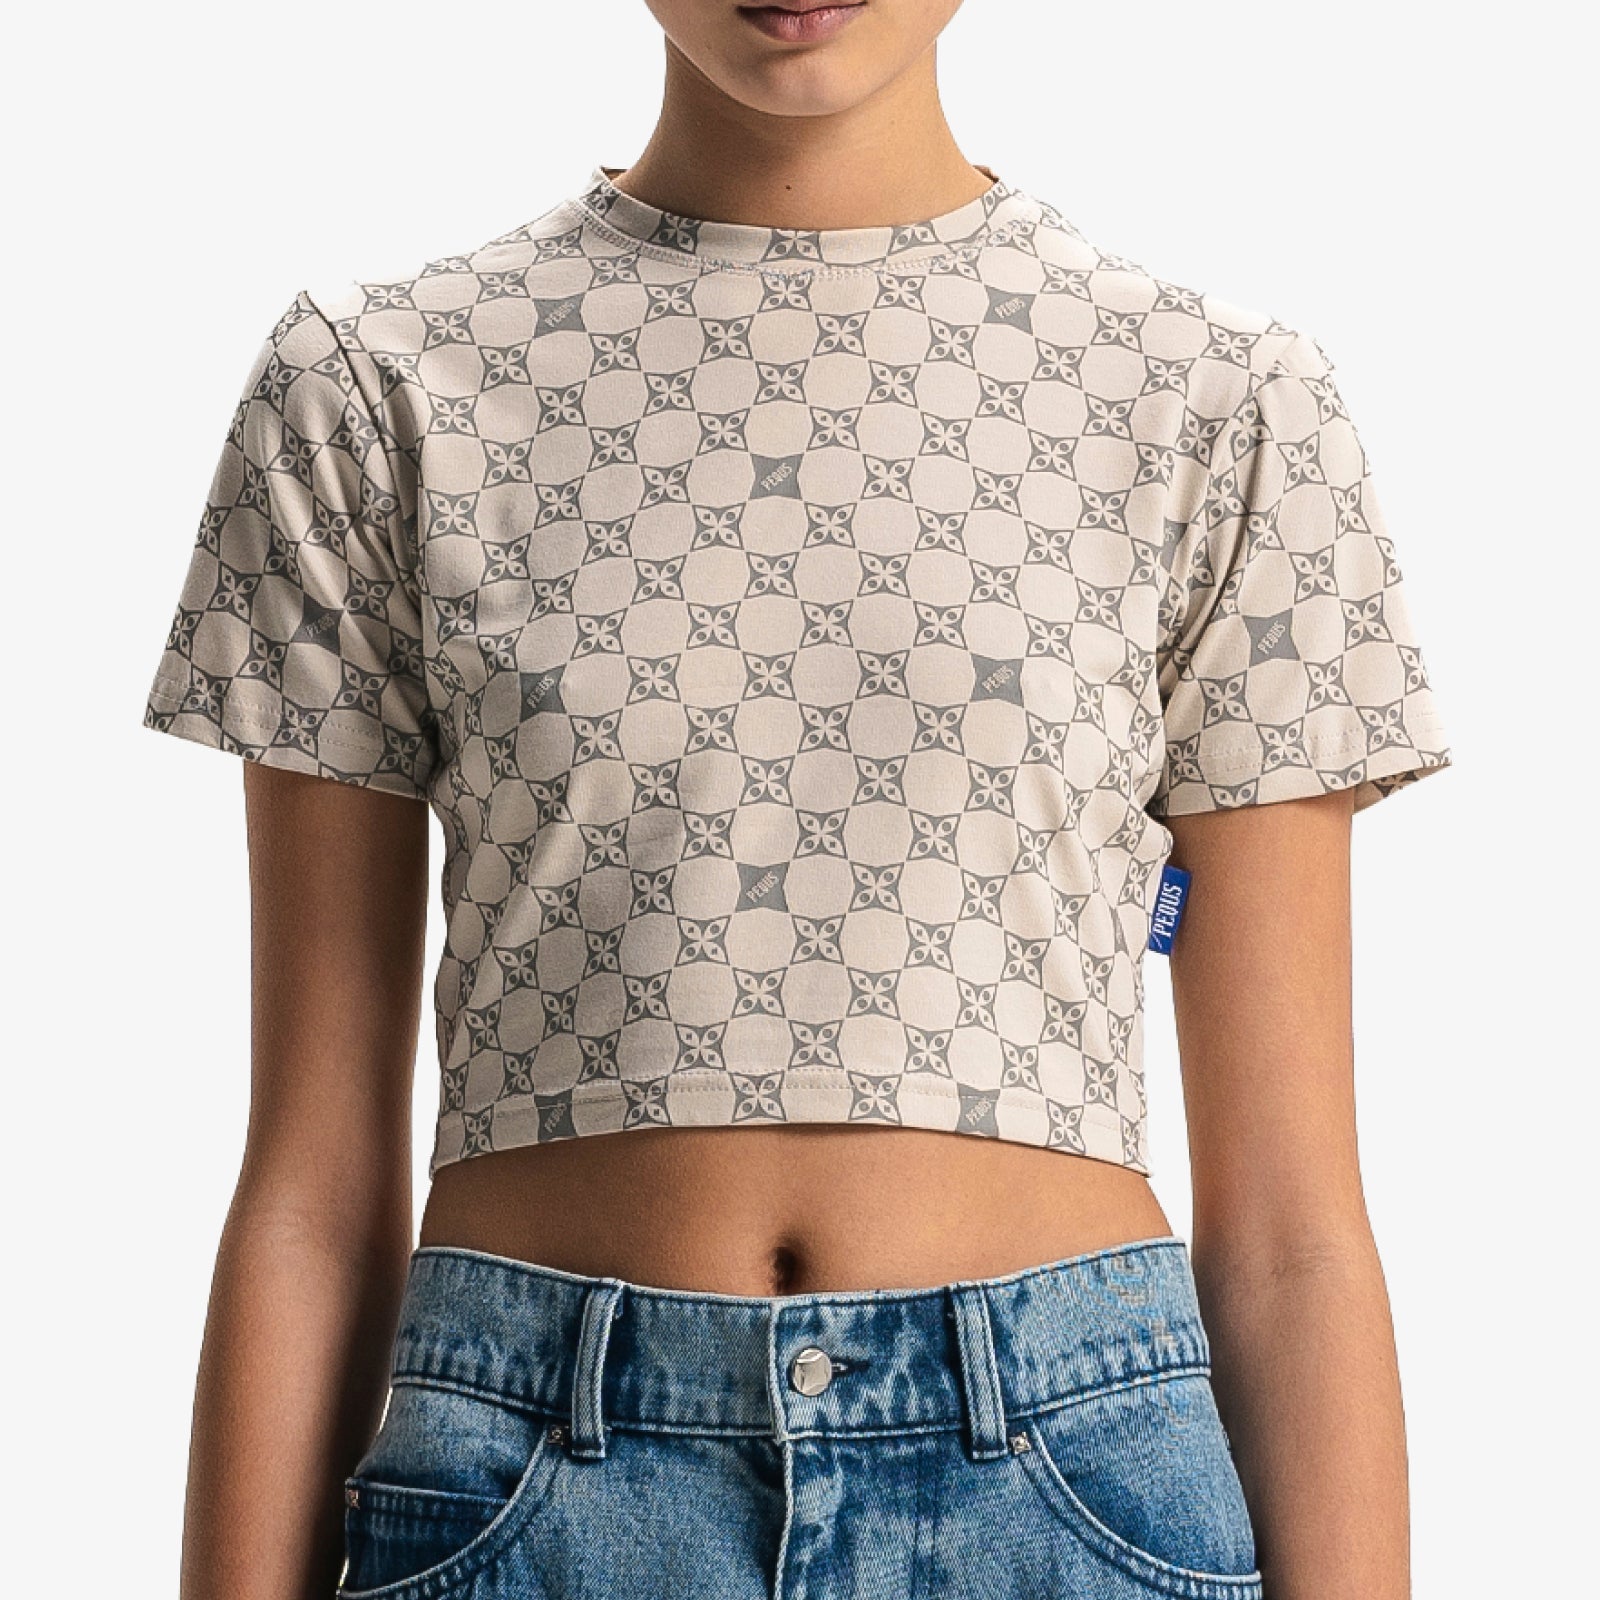 Aether Monogram Top